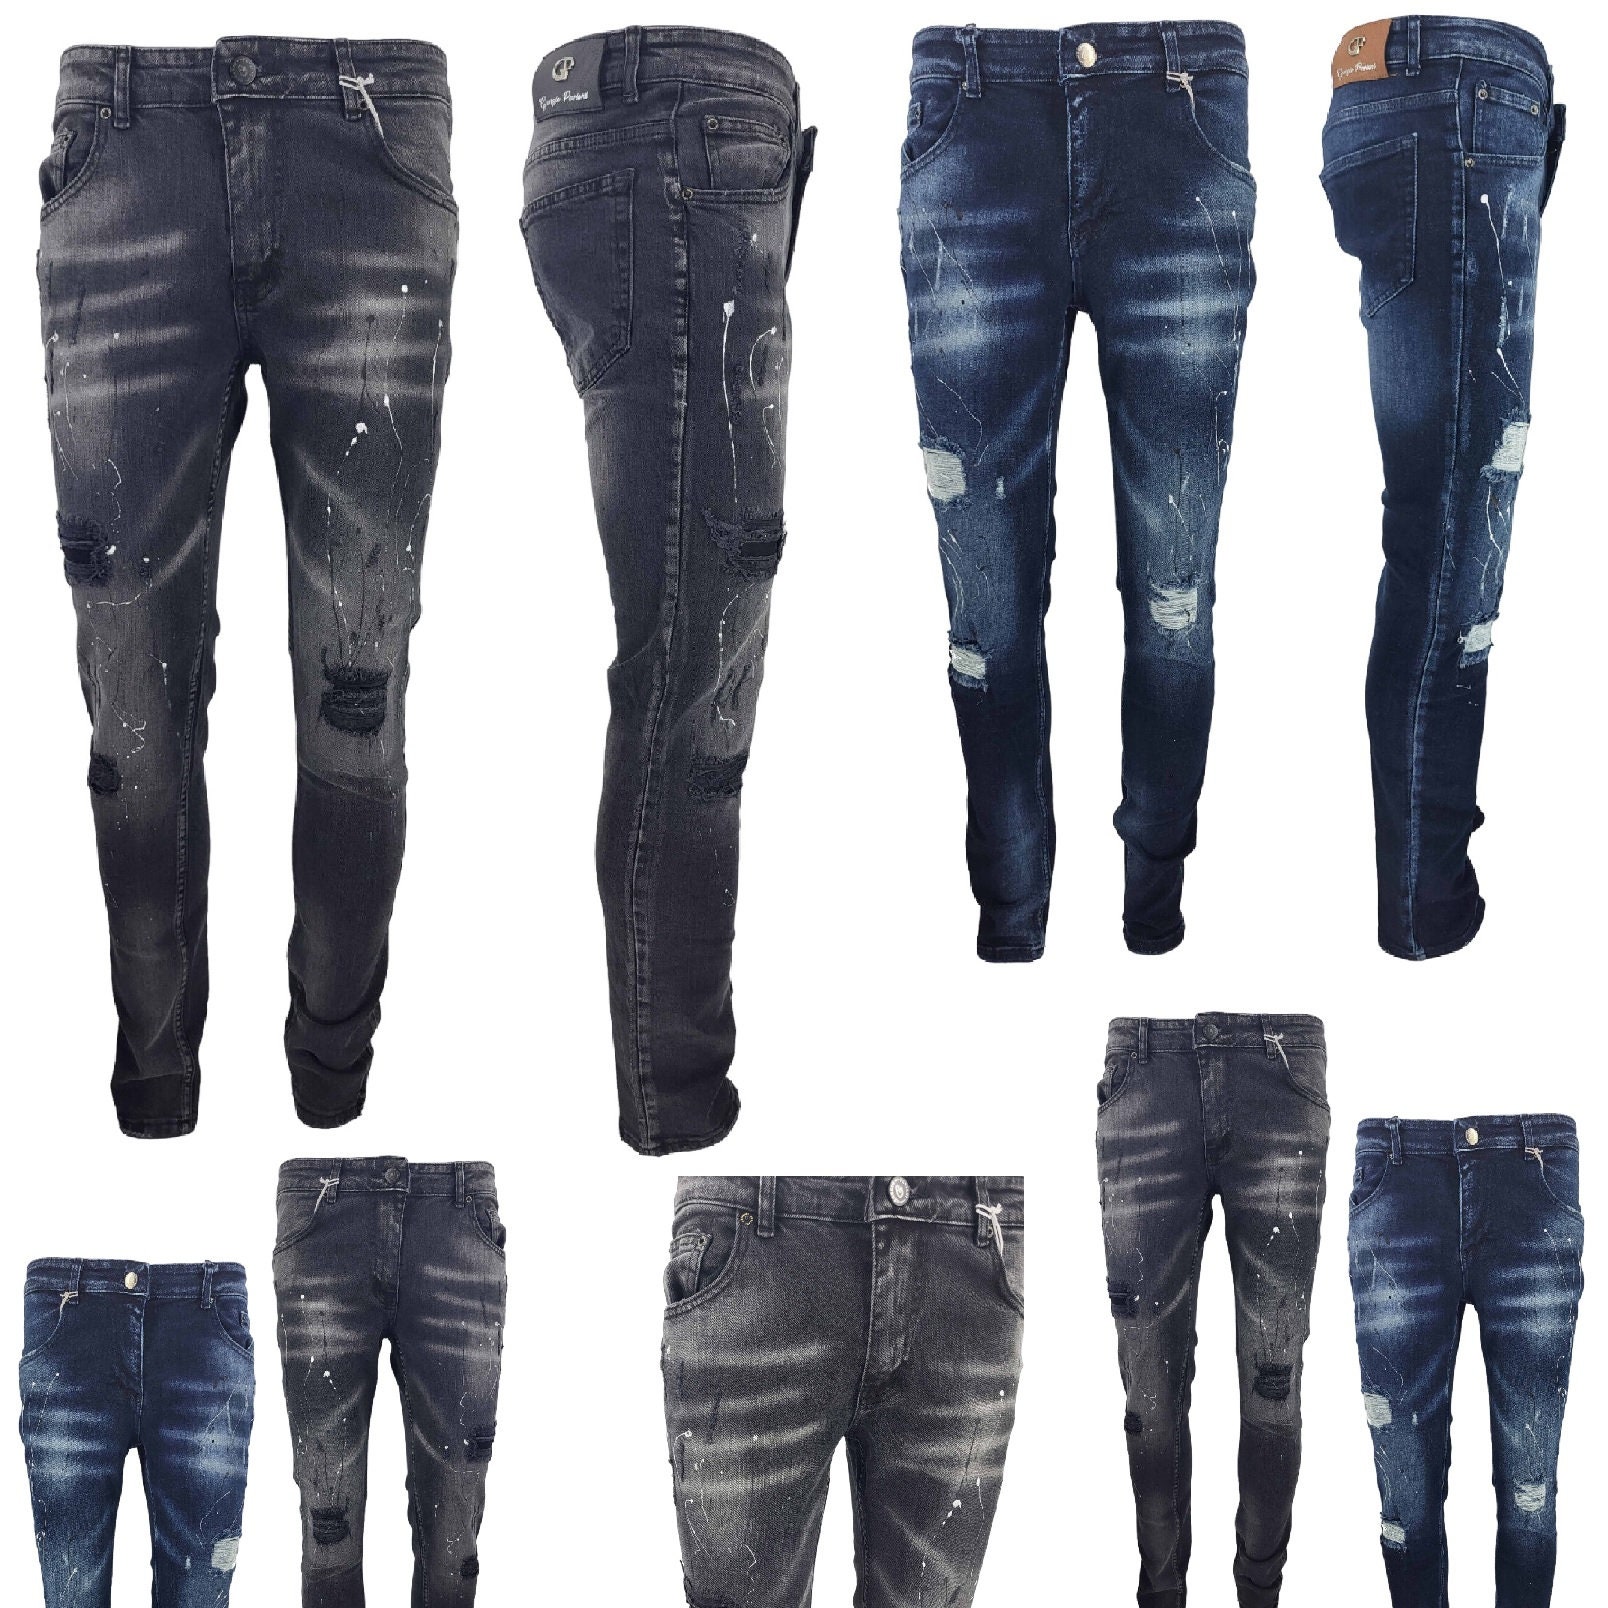 Purple Brand mid-rise Tapered Jeans - Farfetch